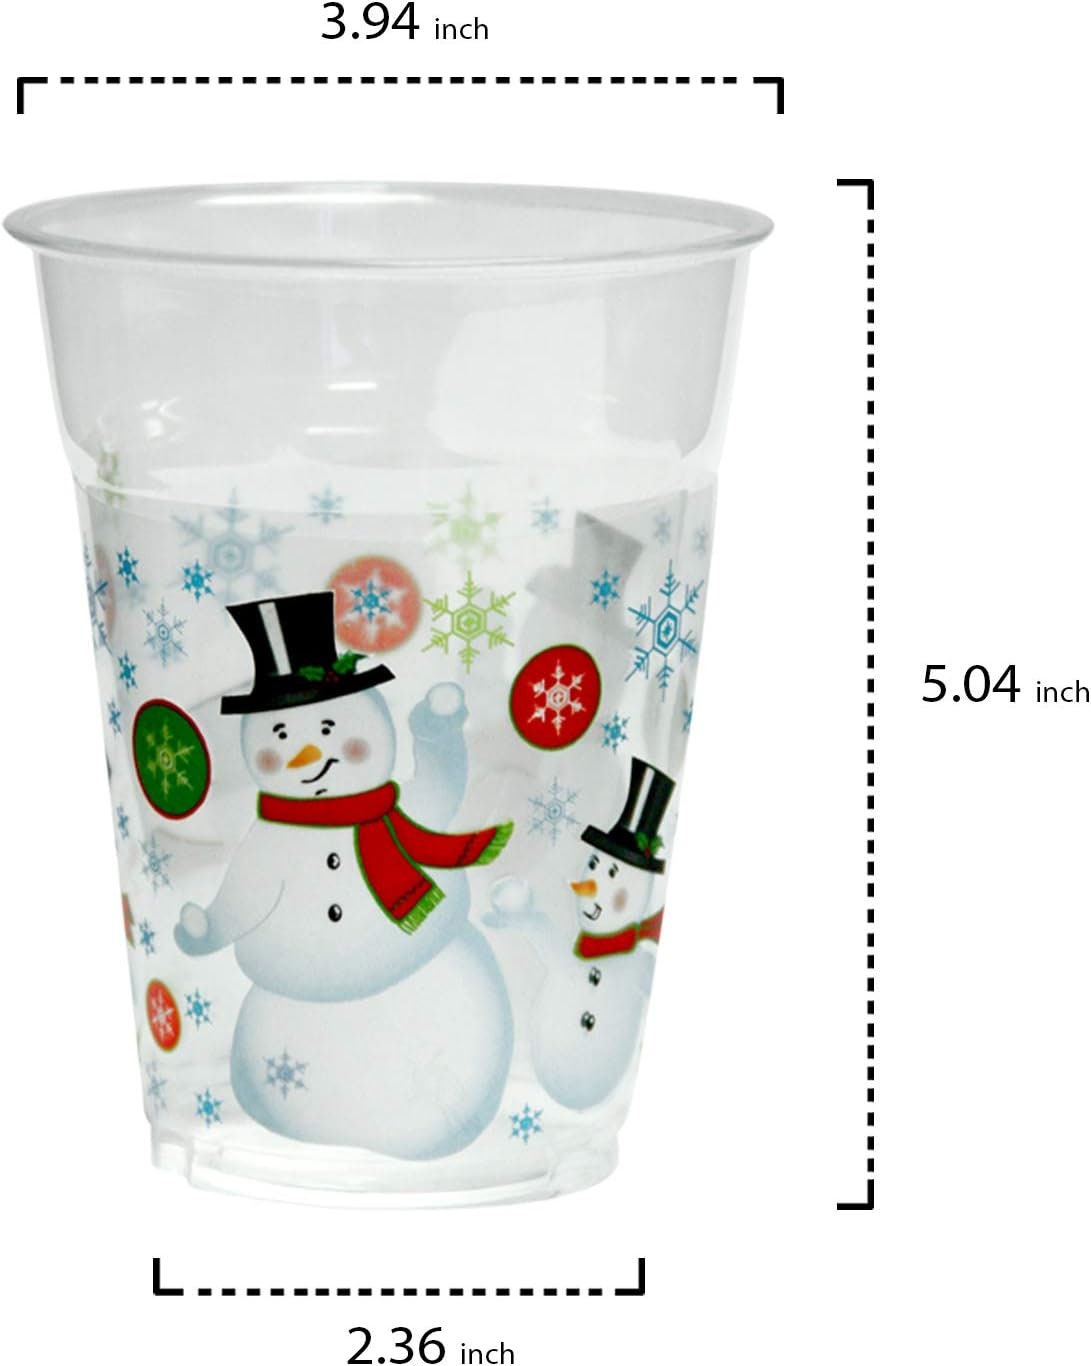 6 Clear Plastic Ball Fillable Ornament Favor 4.5 120mm 